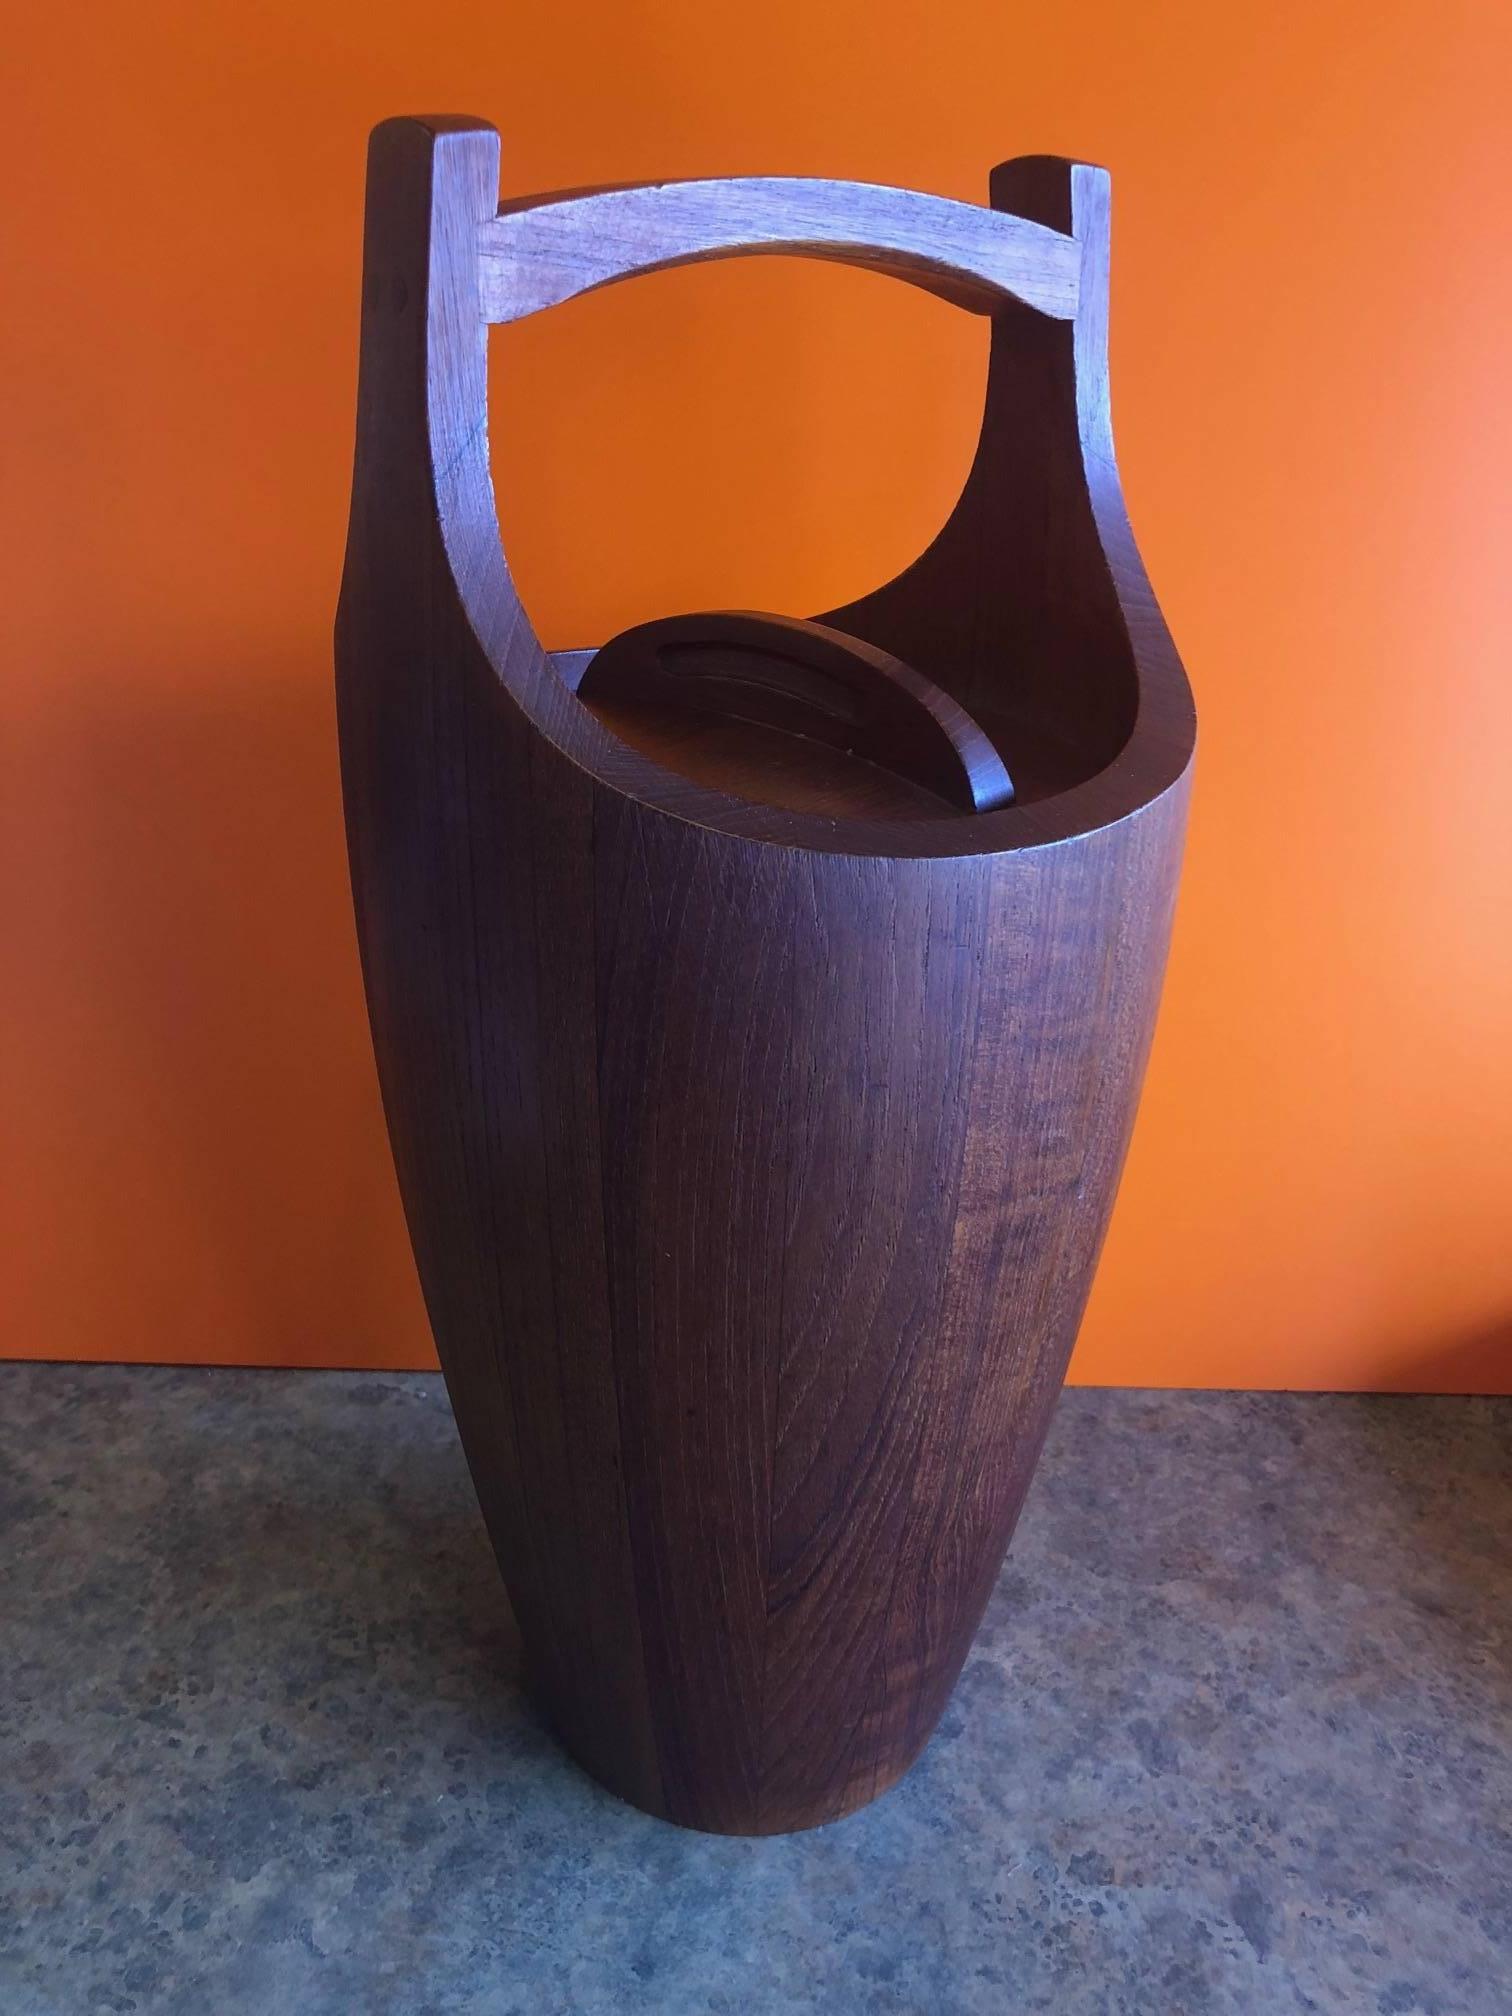 Massive staved teak ice bucket by Jens Quistgaard for Dansk, circa 1960s. The piece is in excellent vintage condition with a removable lid and an orange plastic liner.